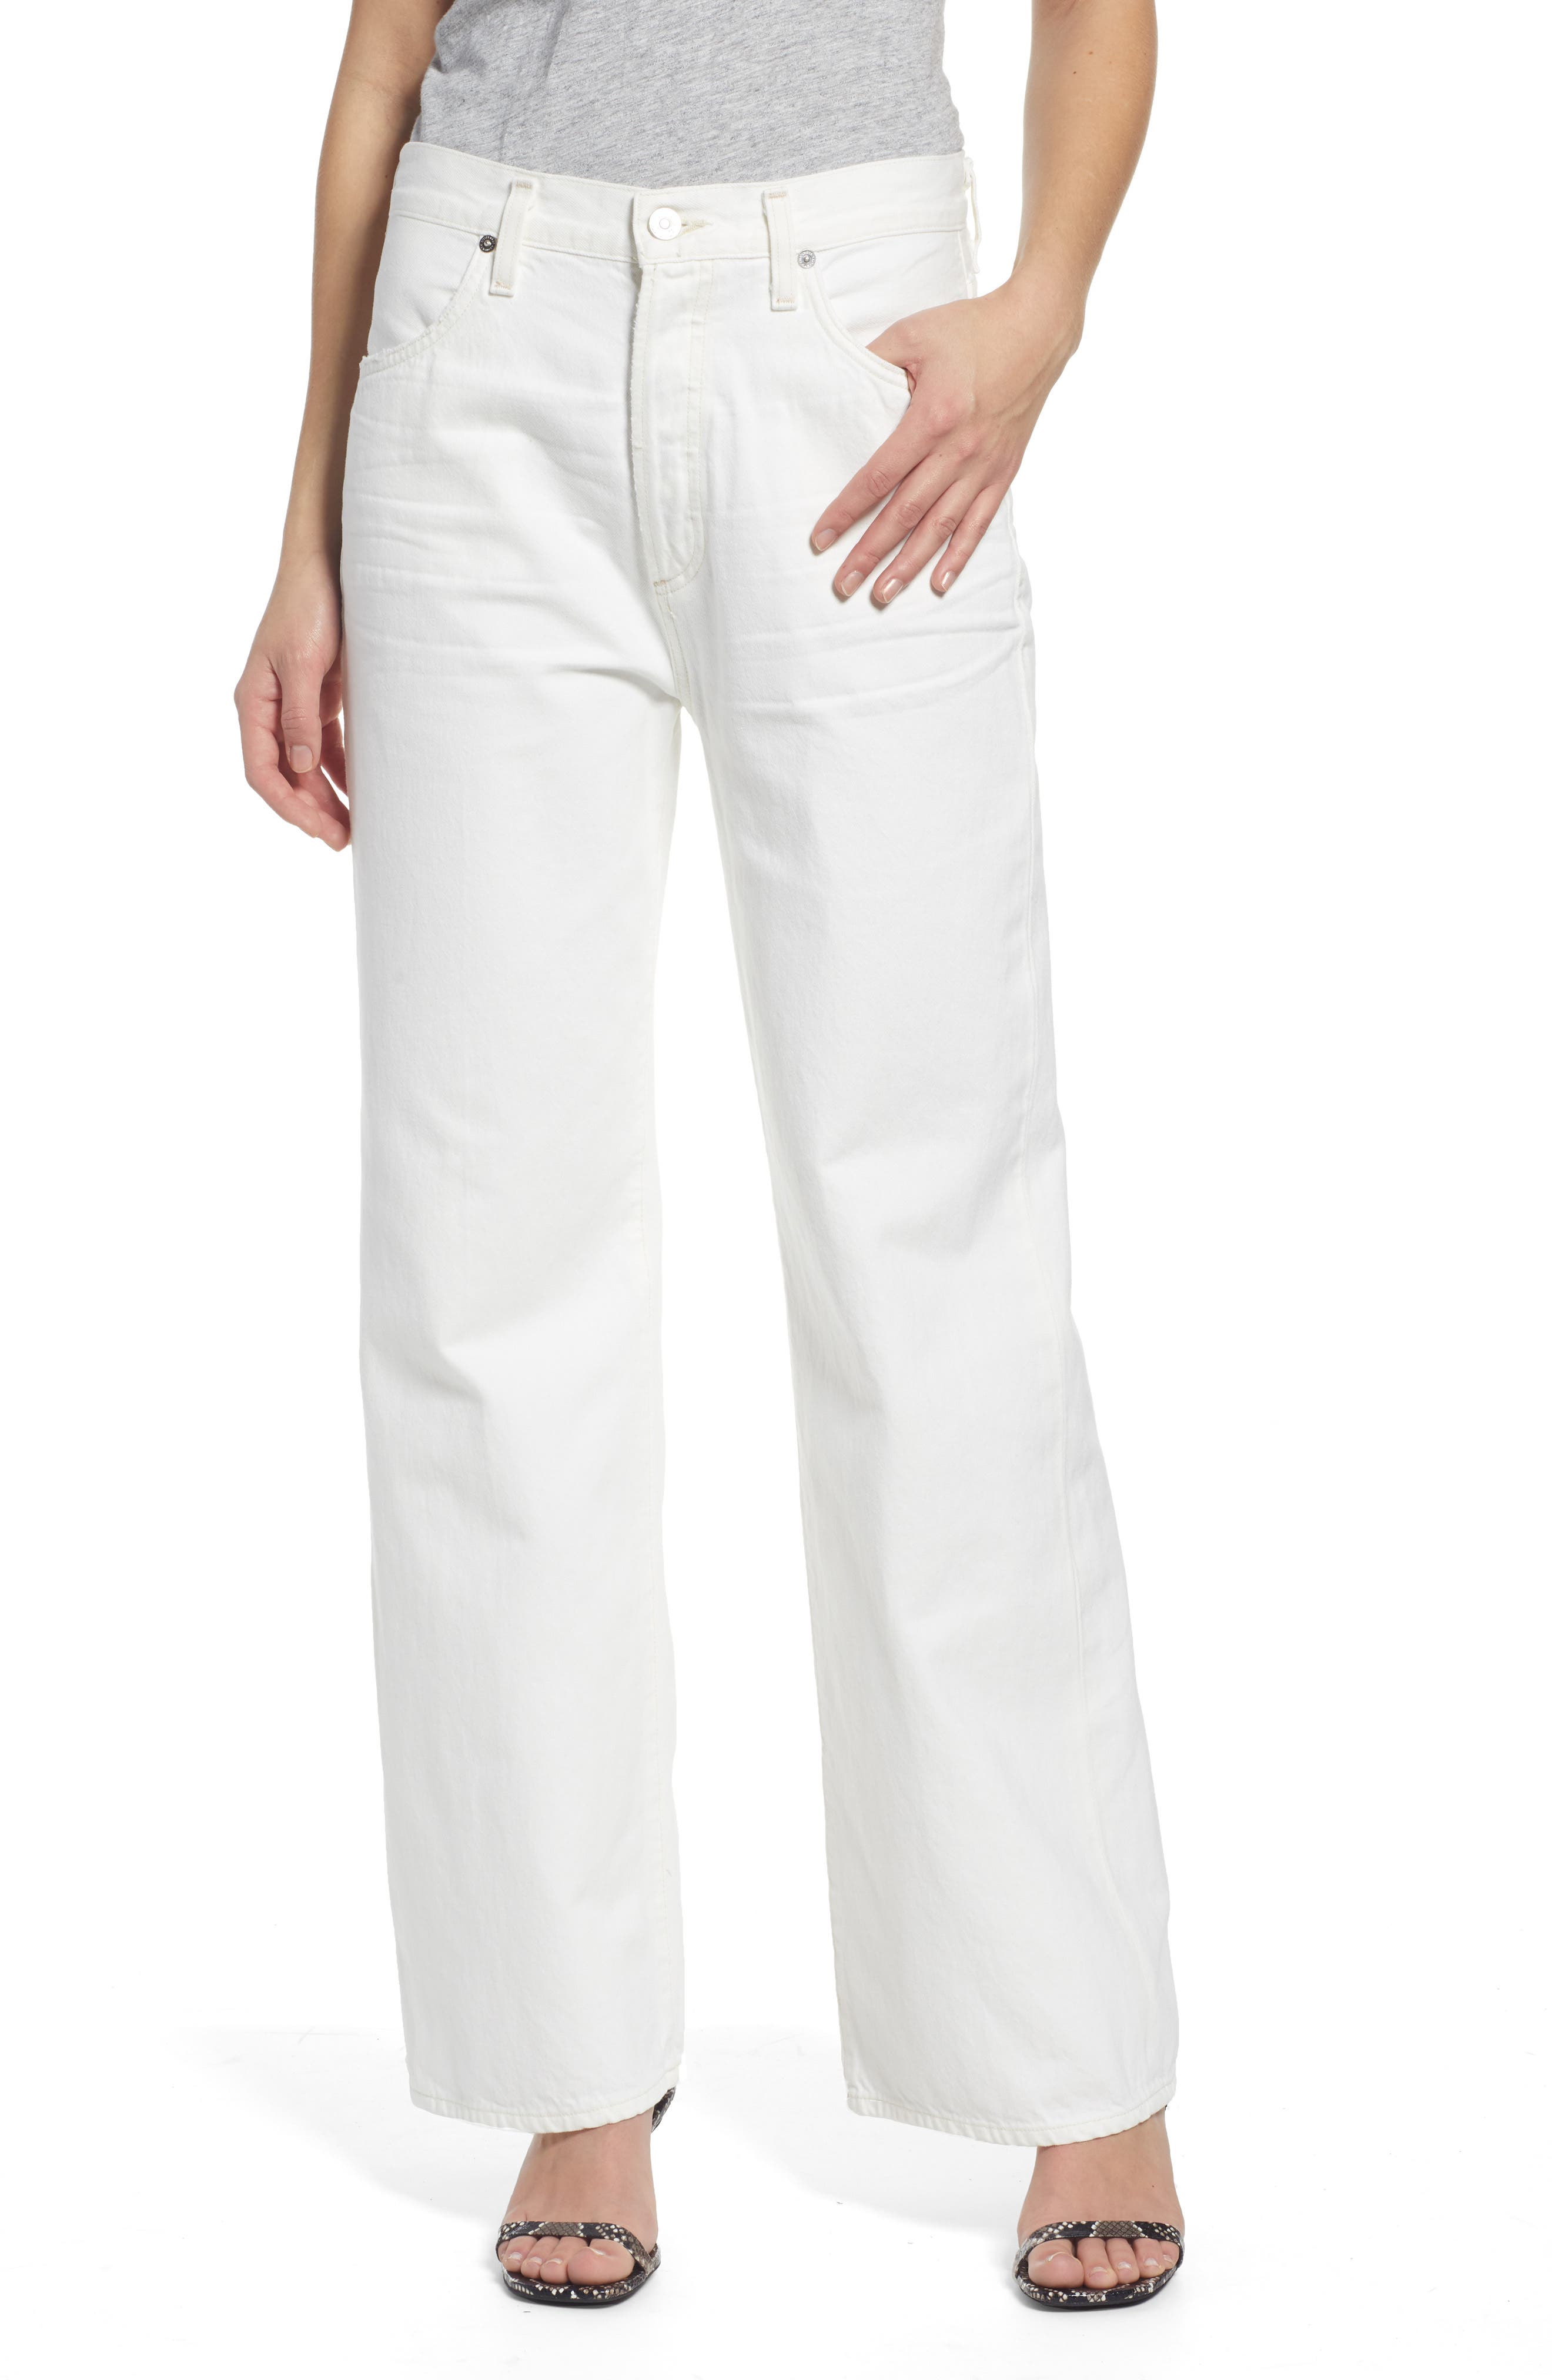 citizens of humanity flavie trouser jeans